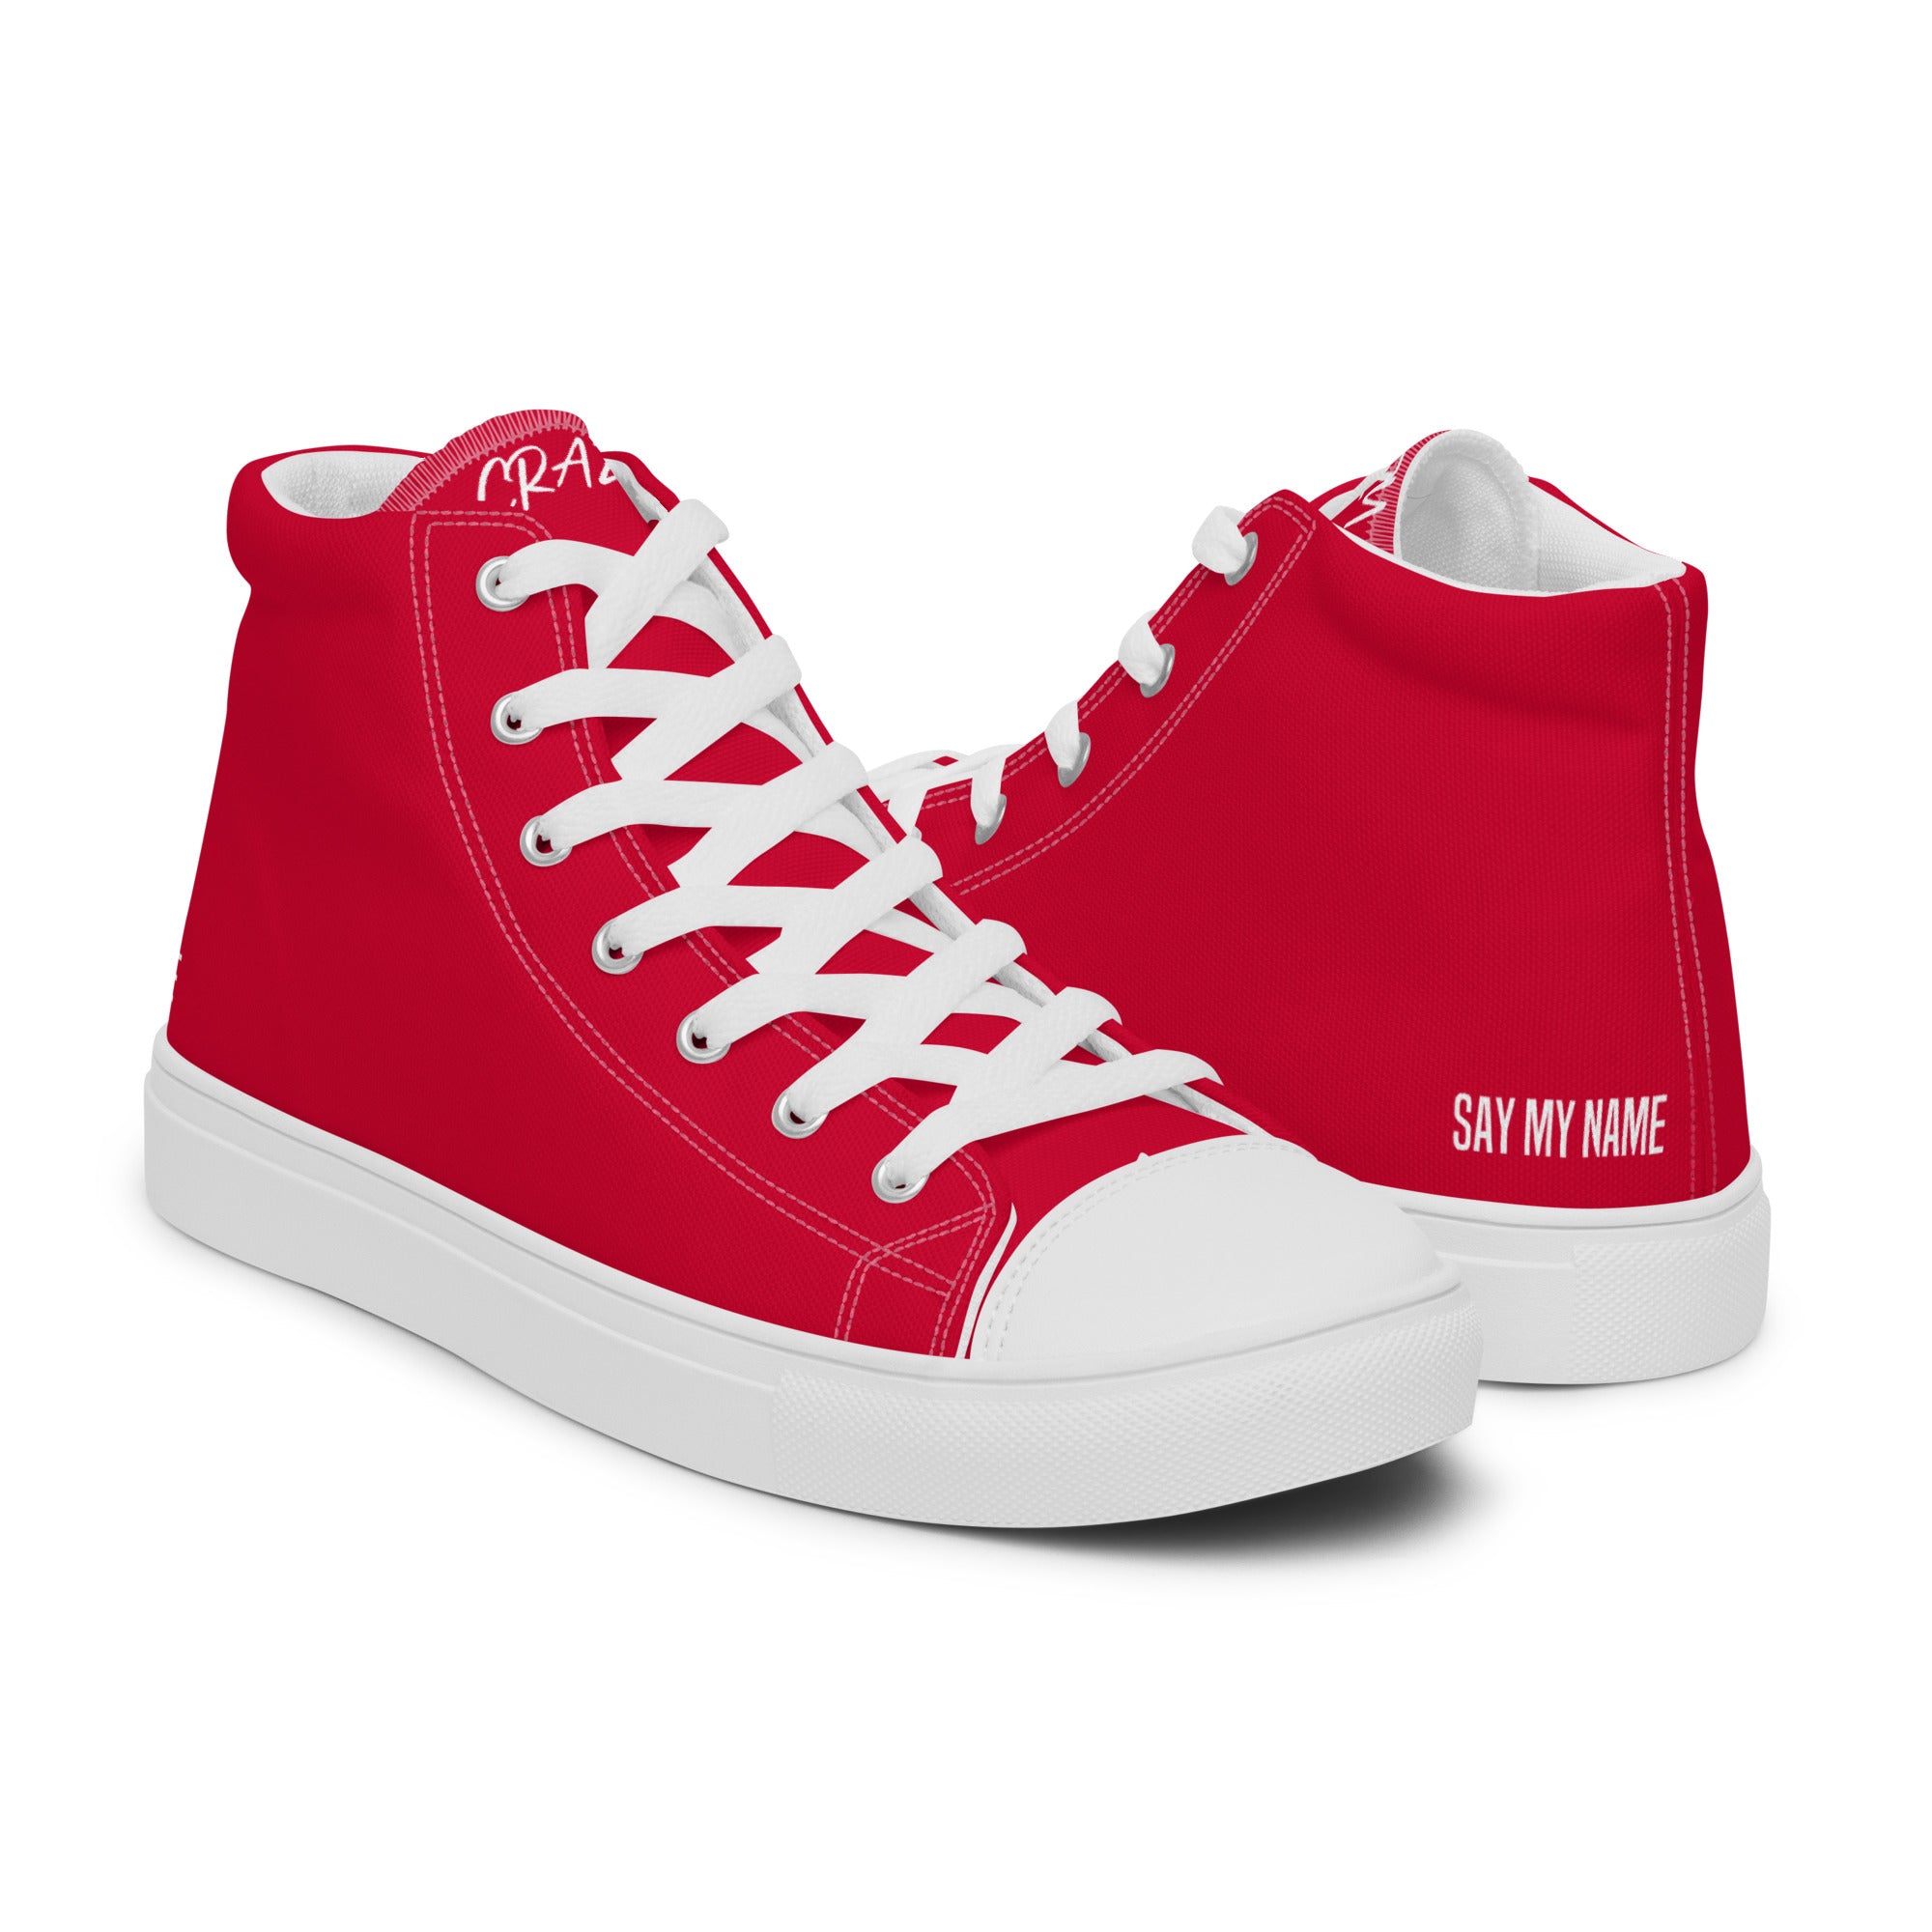 "SAY MY NAME" men's high red canvas sneakers